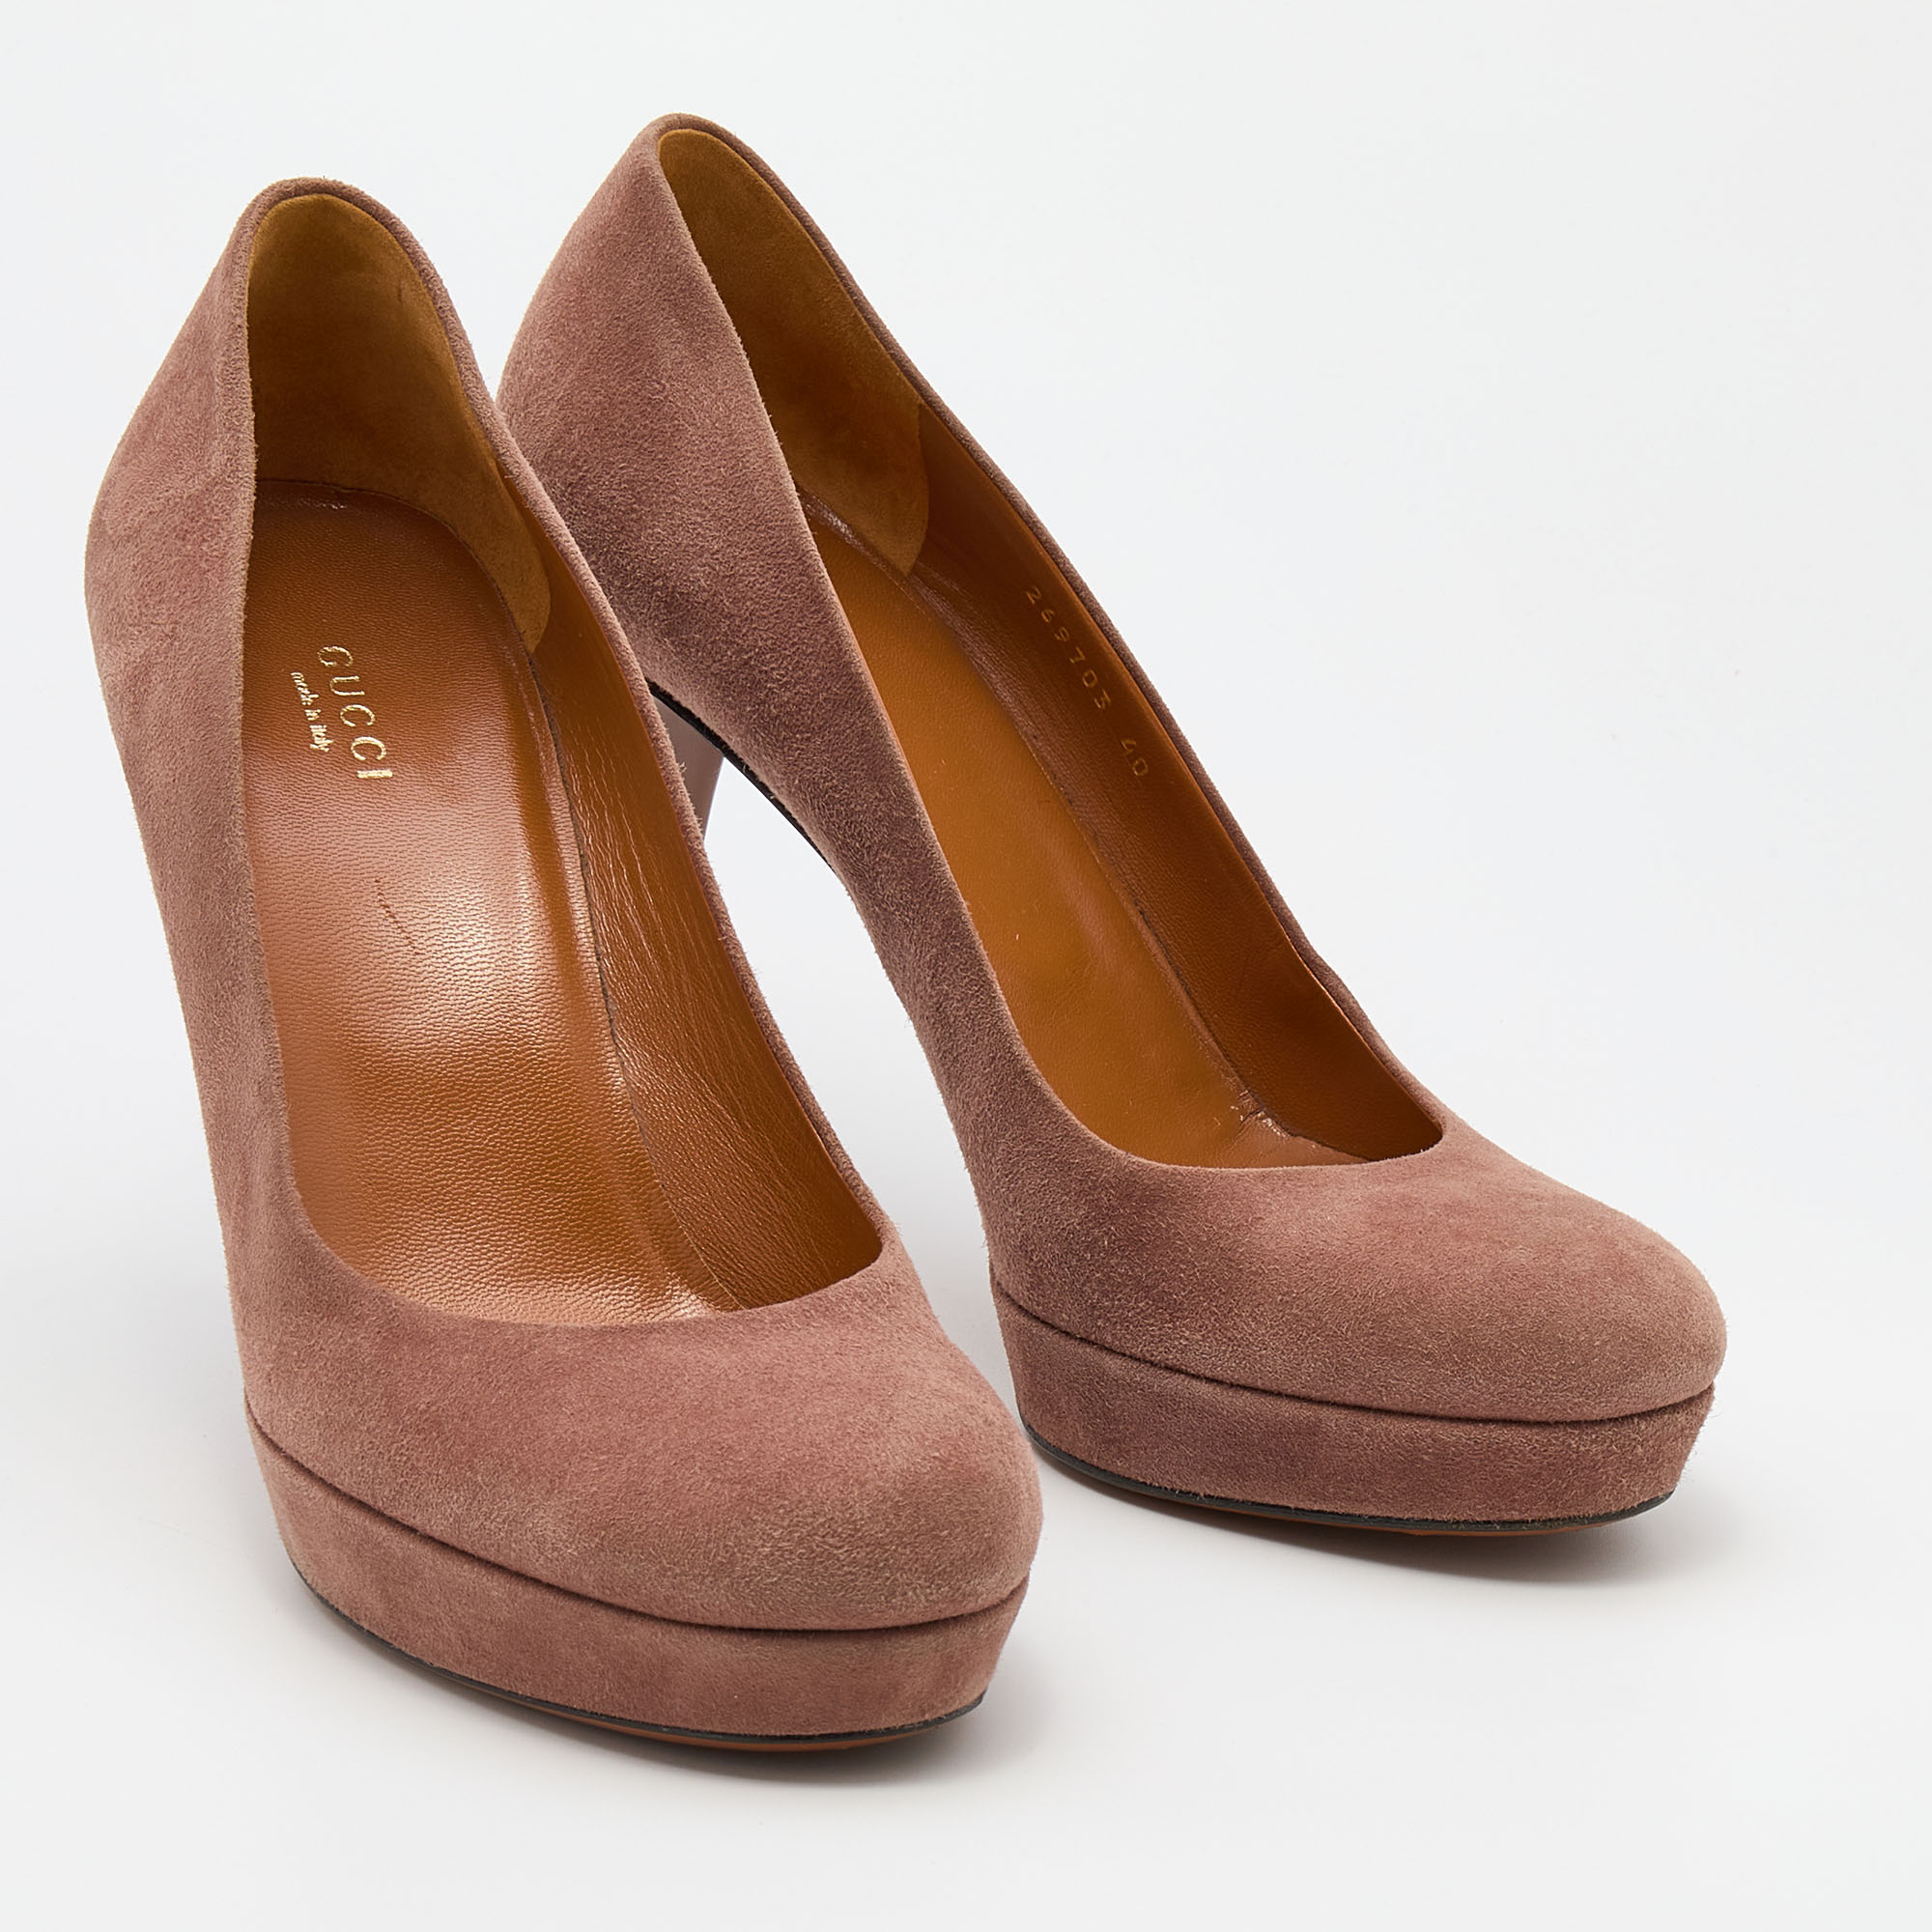 Gucci Pink Suede Round Toe Pumps Size 40